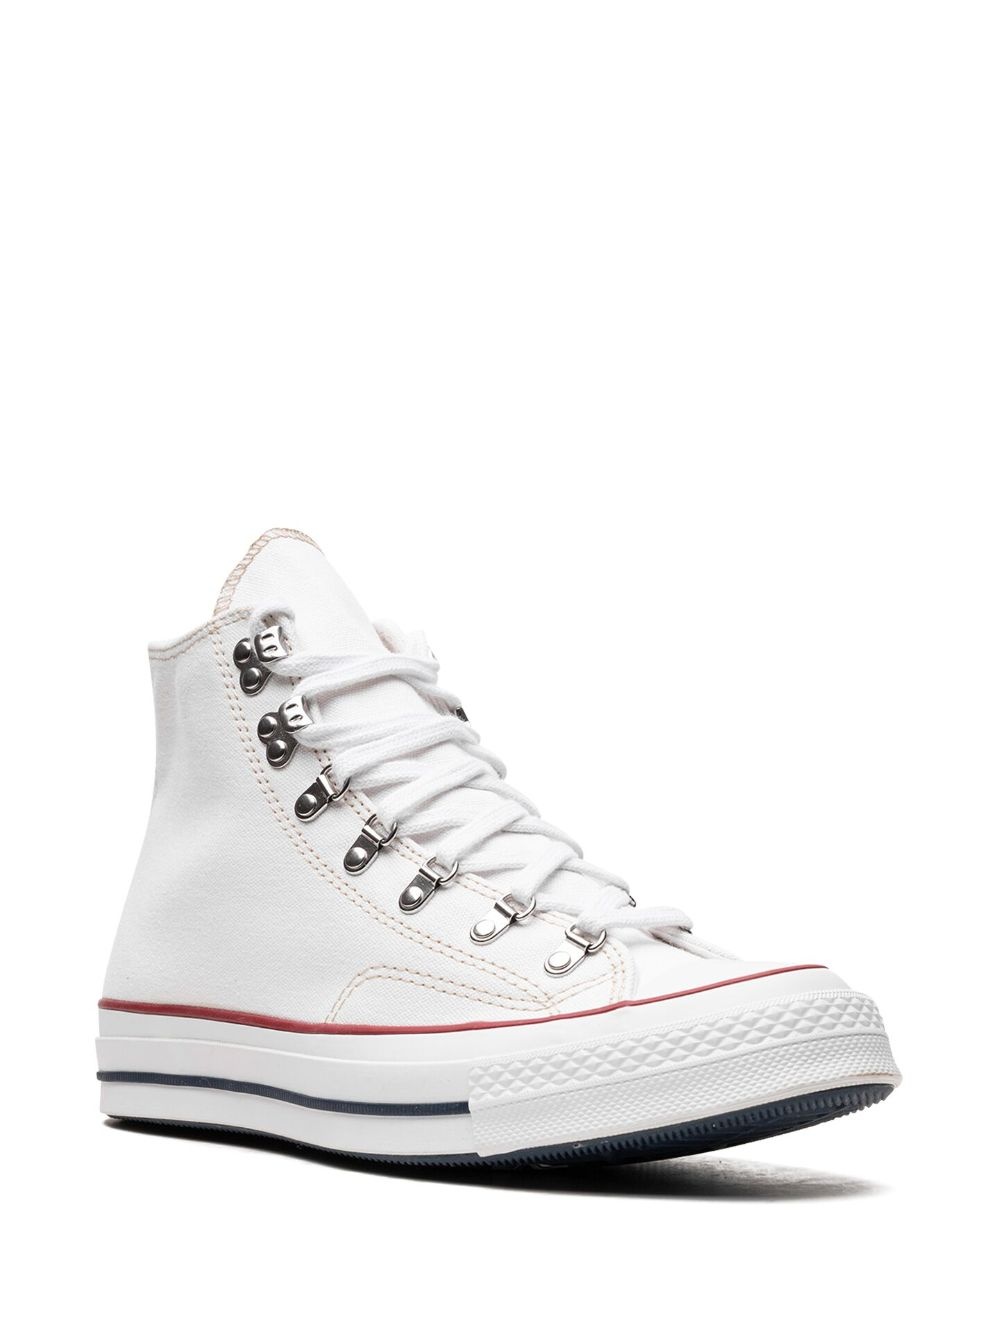 Chuck Taylor All-Star 70 Hi "pgLang White" sneakers - 2